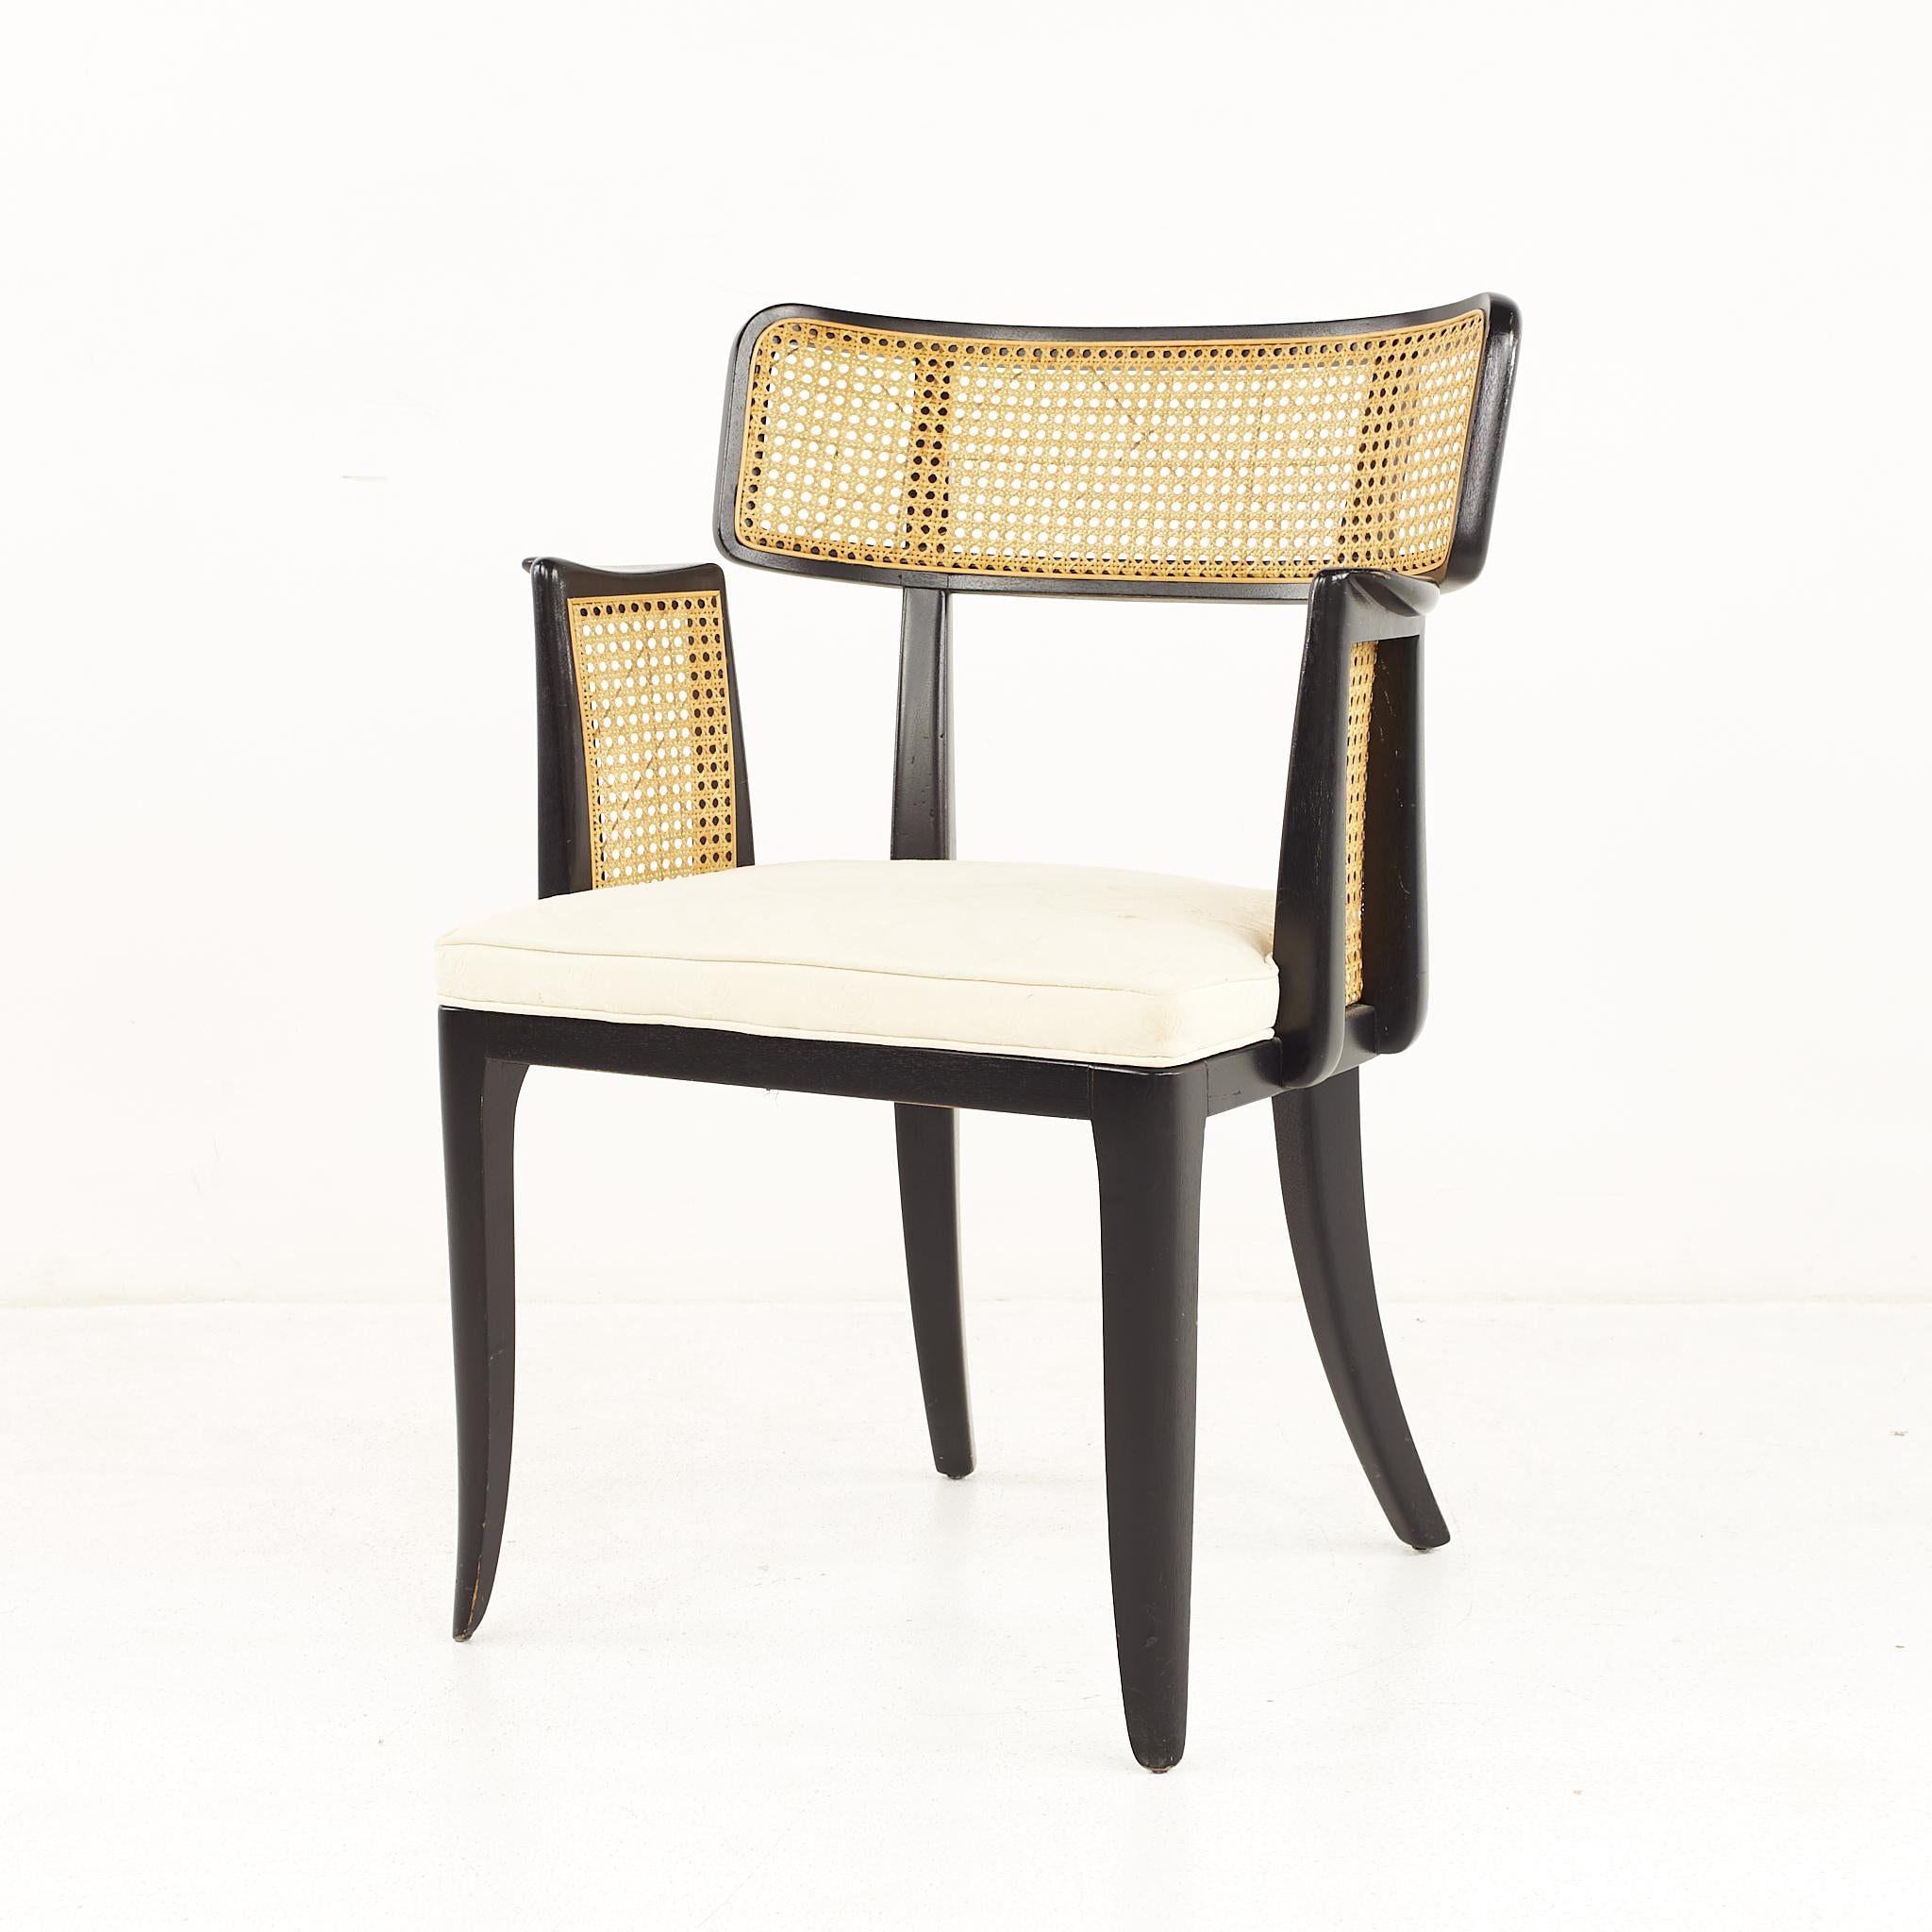 Late 20th Century Edward Wormley for Dunbar Mid Century Cane Back Dining Chairs - Set of 6 For Sale